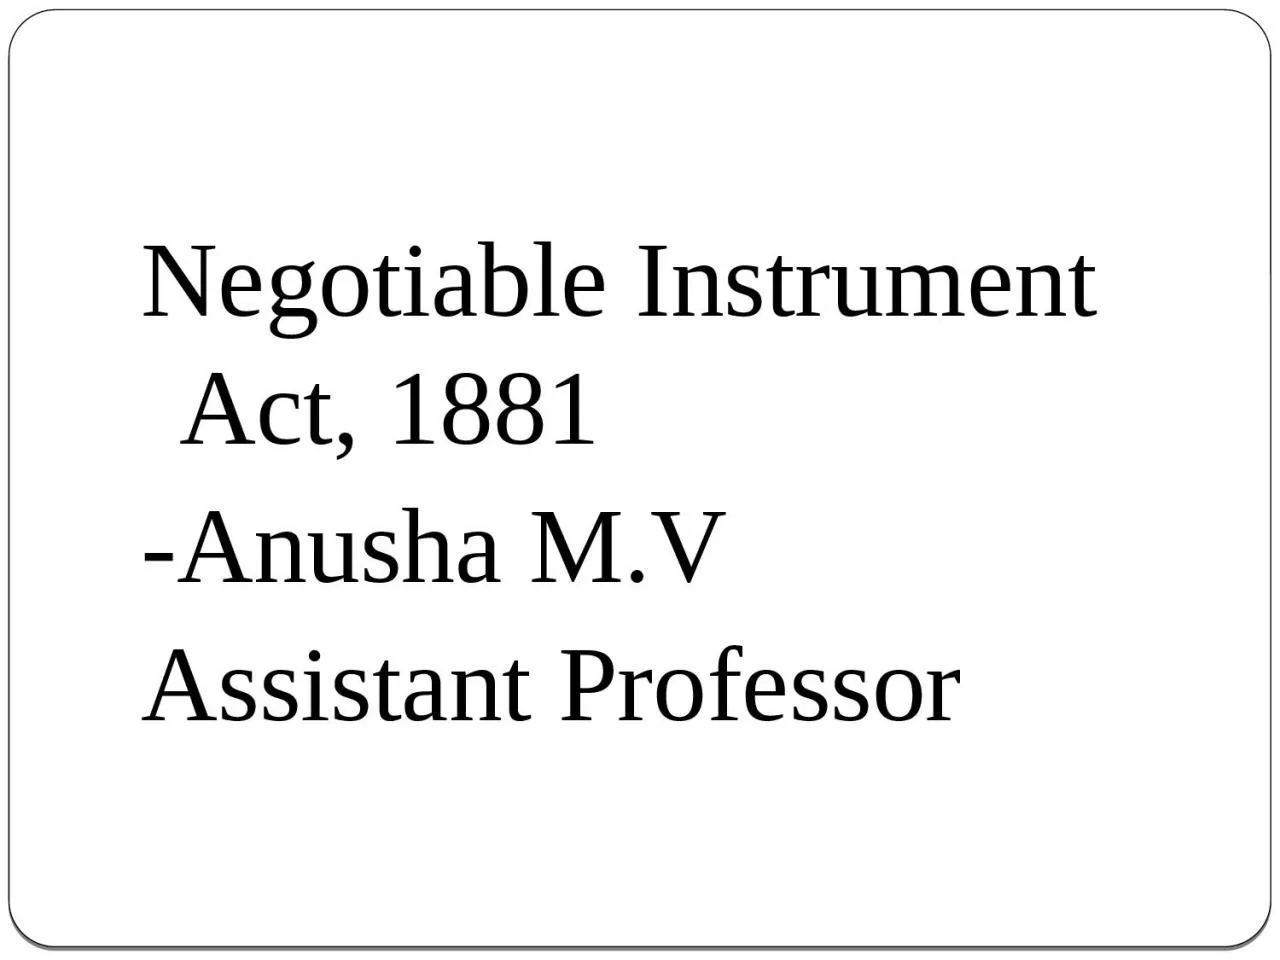 Negotiable Instrument Act, 1881